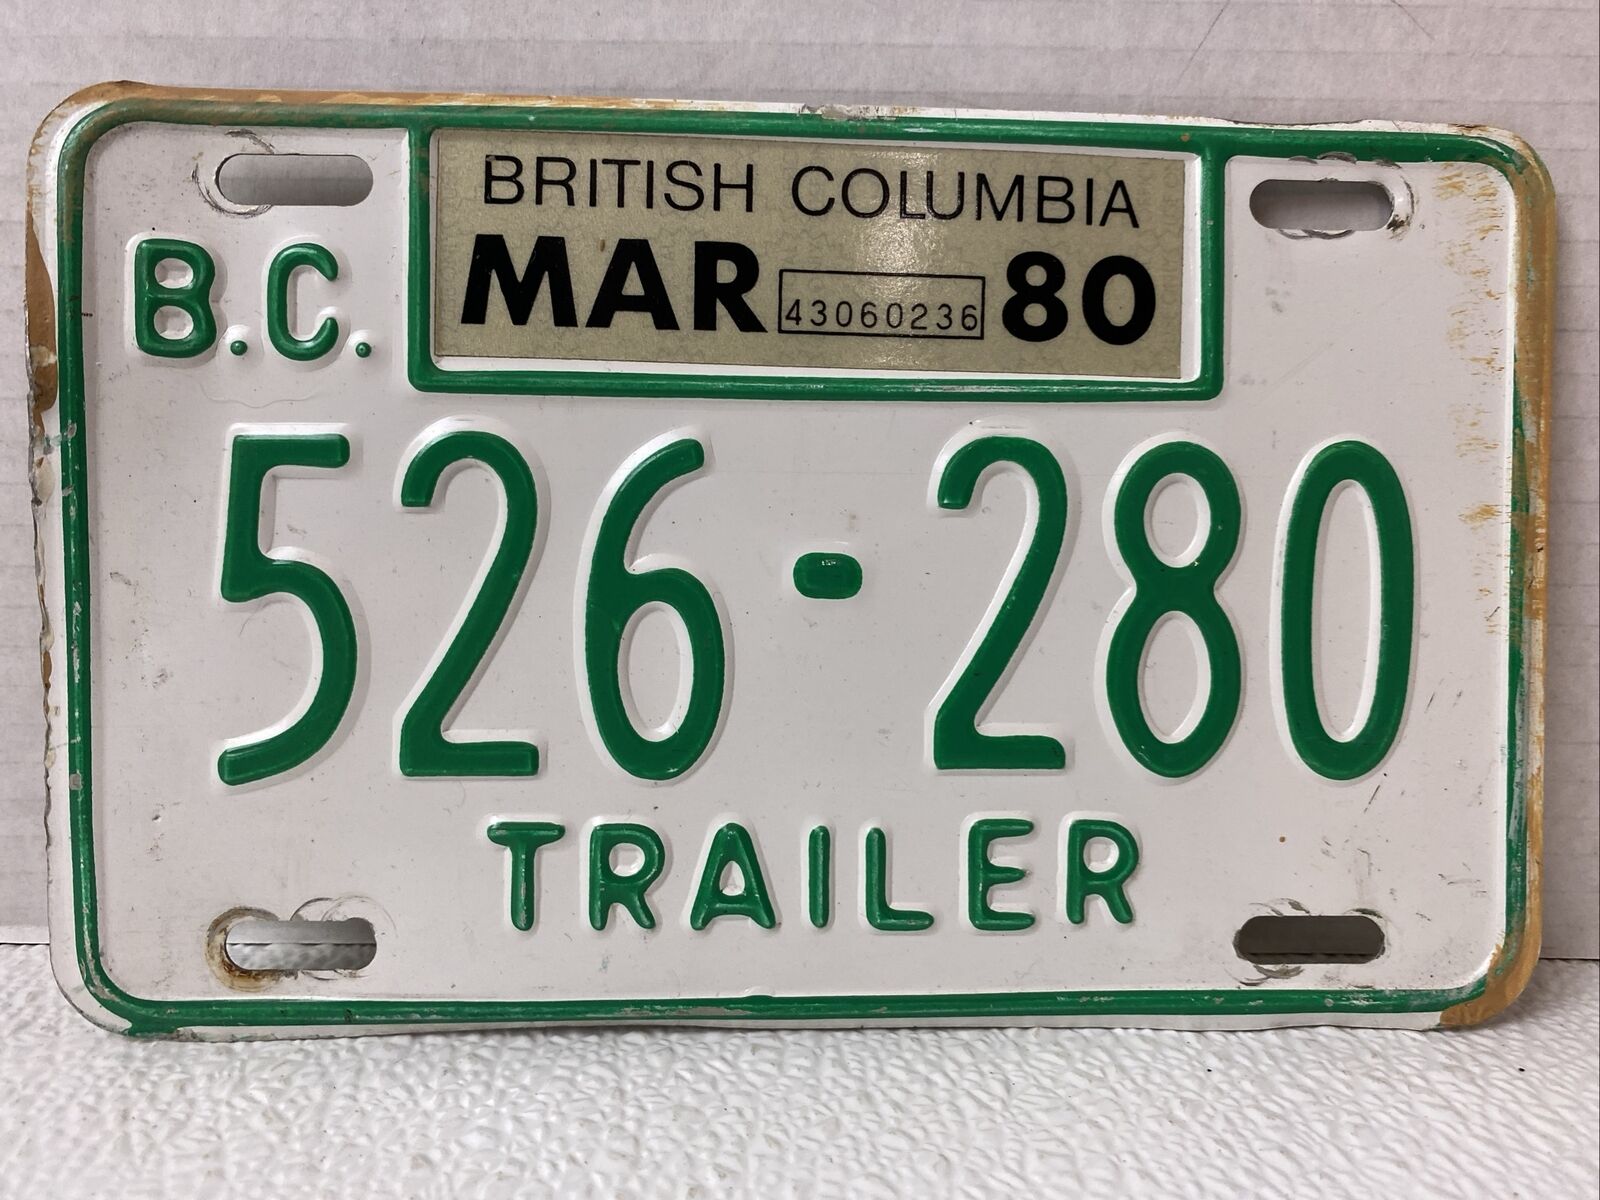 1980 British Columbia Trailer License Plate 526-280 Collectible Mar 80 Tags